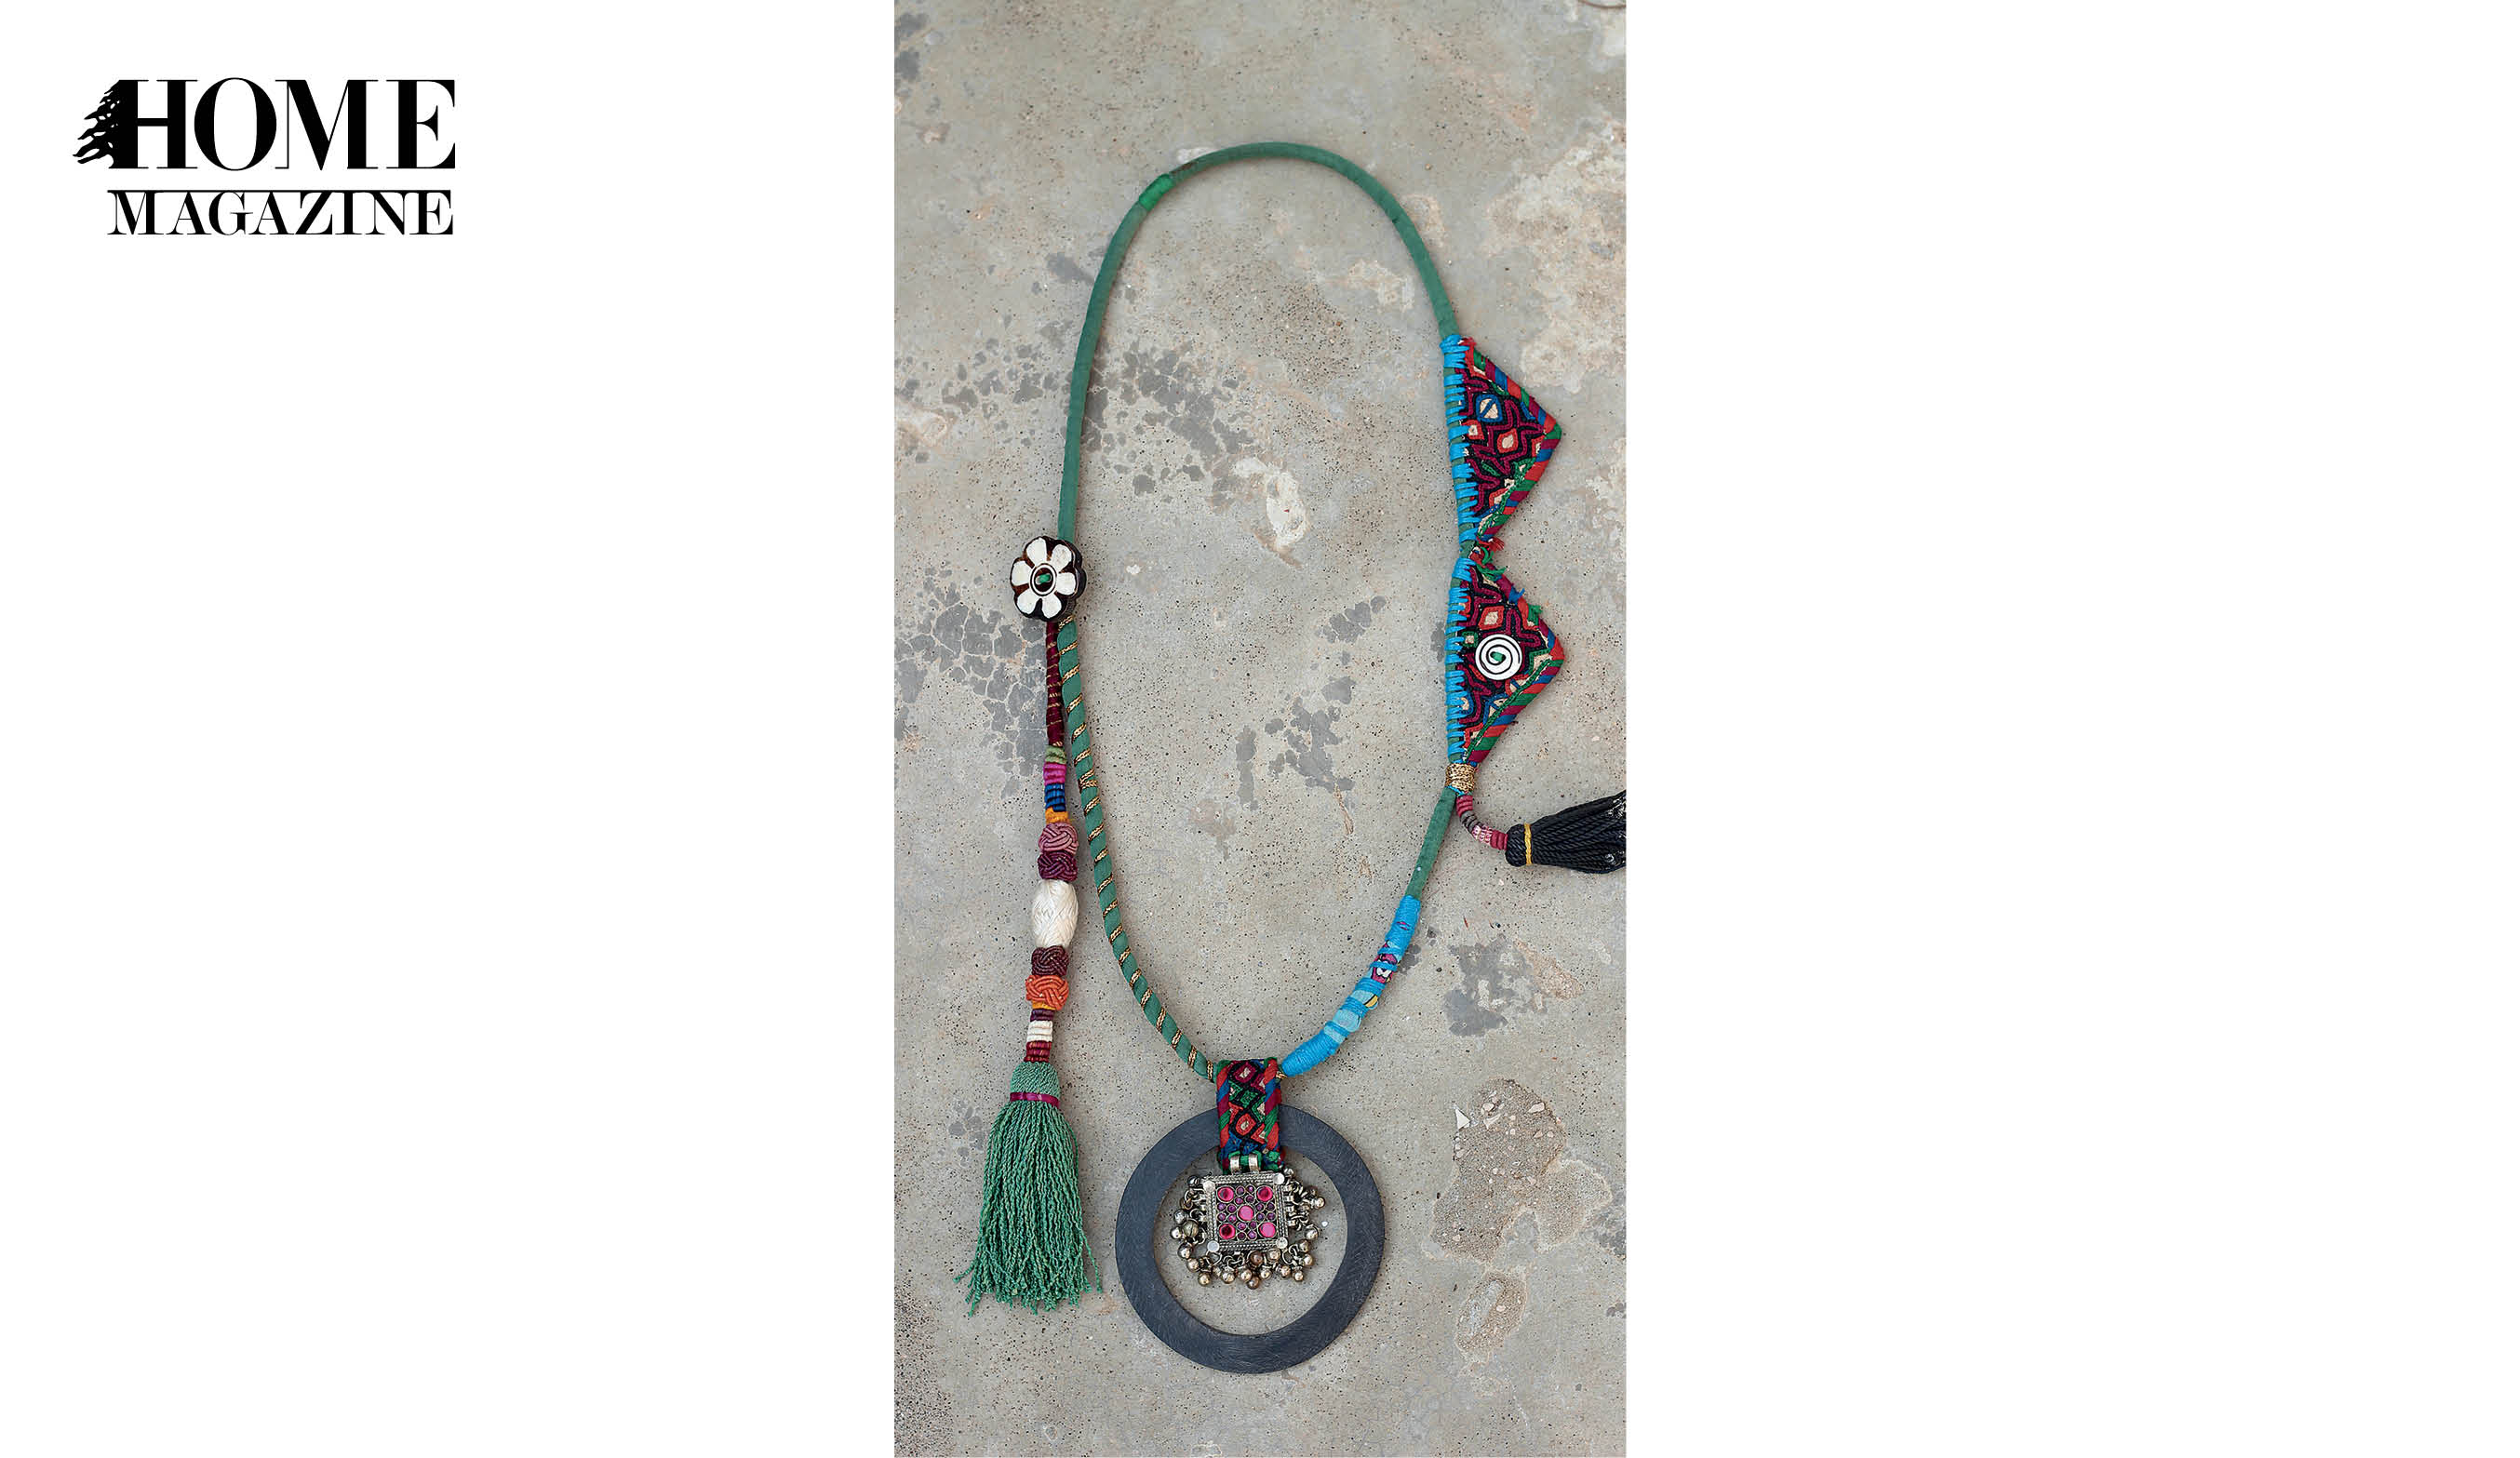 Necklace with round shape and multicolored textile